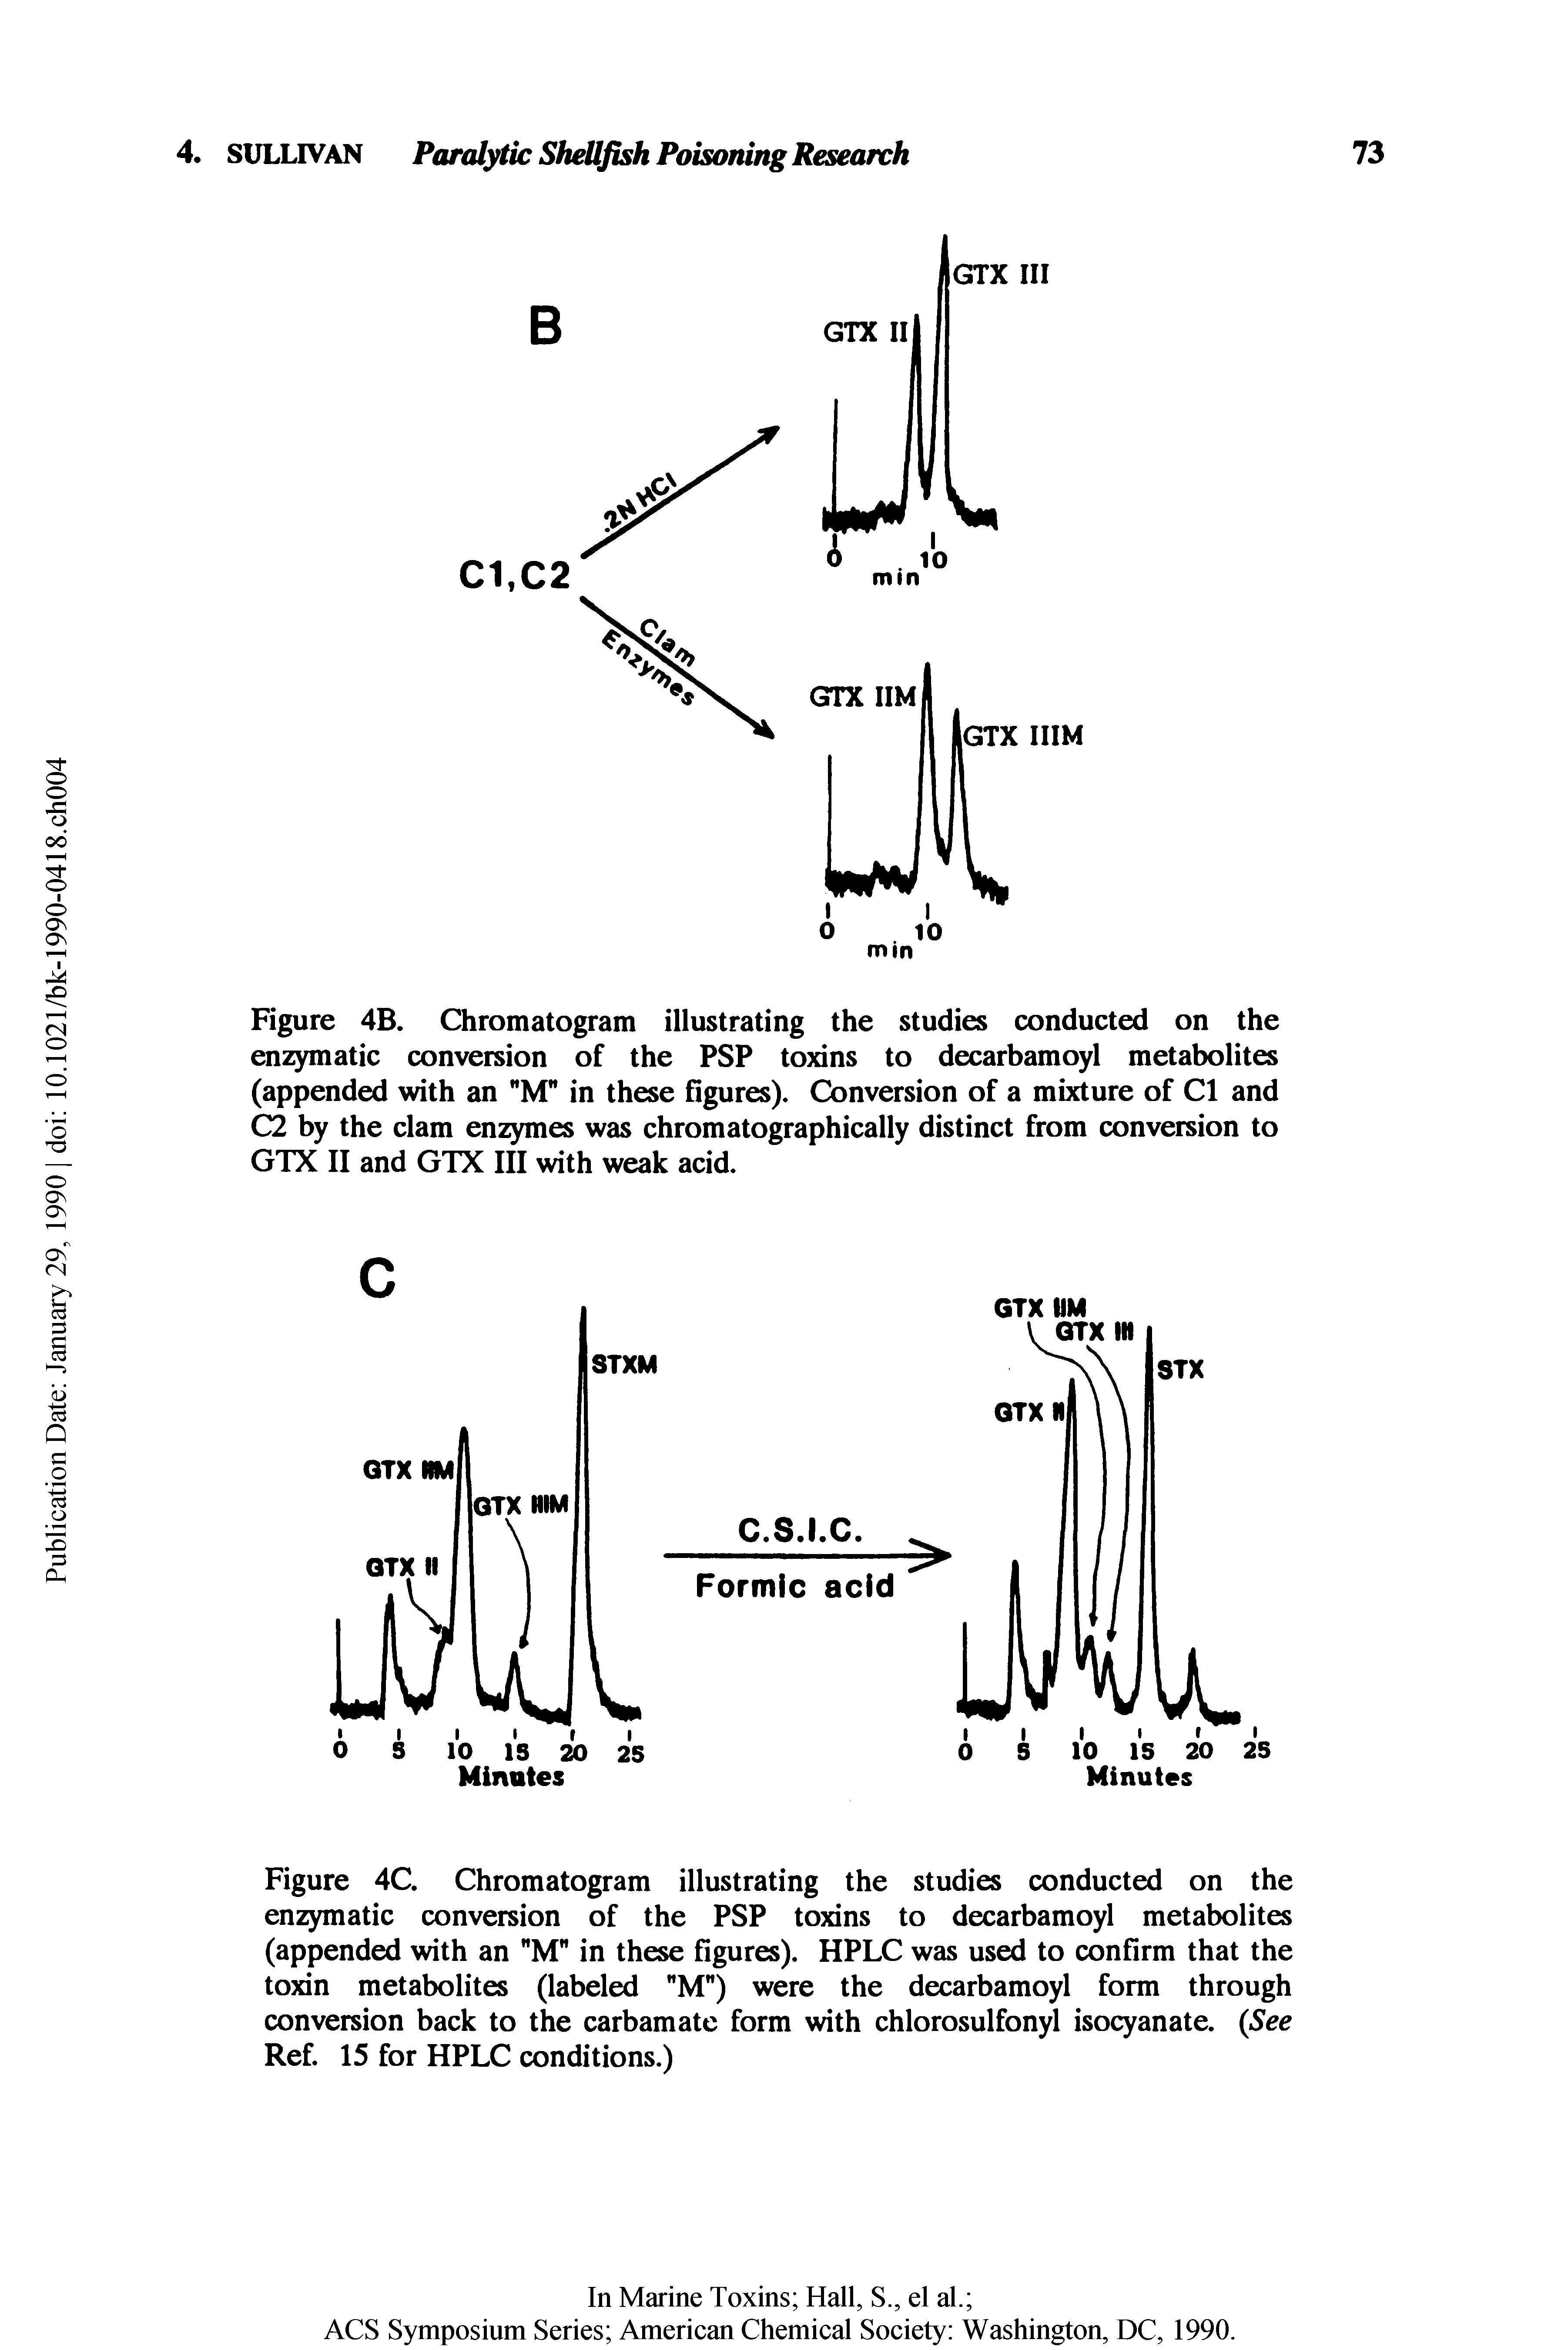 Figure 4C. Chromatogram illustrating the studies conducted on the enzymatic conversion of the PSP toxins to decarbamoyl metabolites (appended with an "M" in these figures). HPLC was used to confirm that the toxin metabolites (labeled "M") were the decarbamoyl form through conversion back to the carbamate form with chlorosulfonyl isocyanate. (See Ref. 15 for HPLC conditions.)...